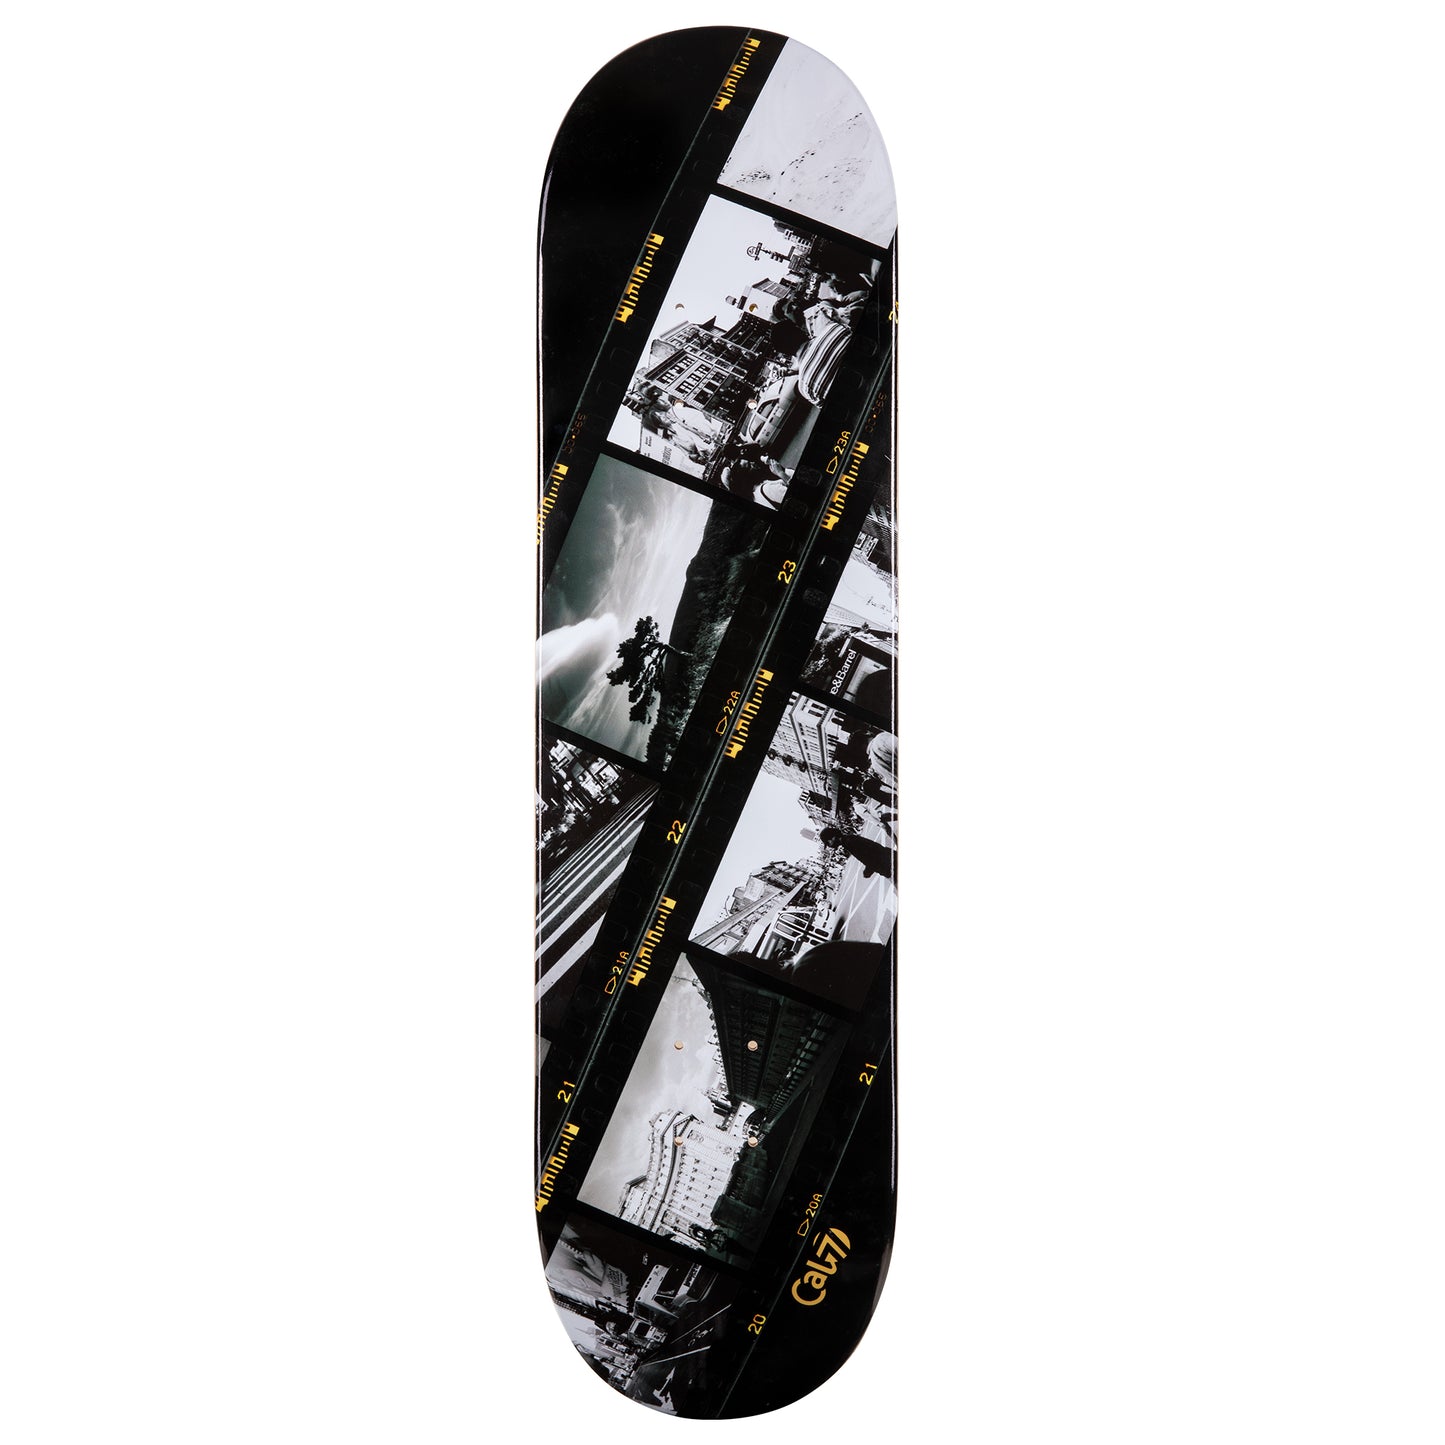 cold pressed cal 7 skateboard deck with negative film graphic